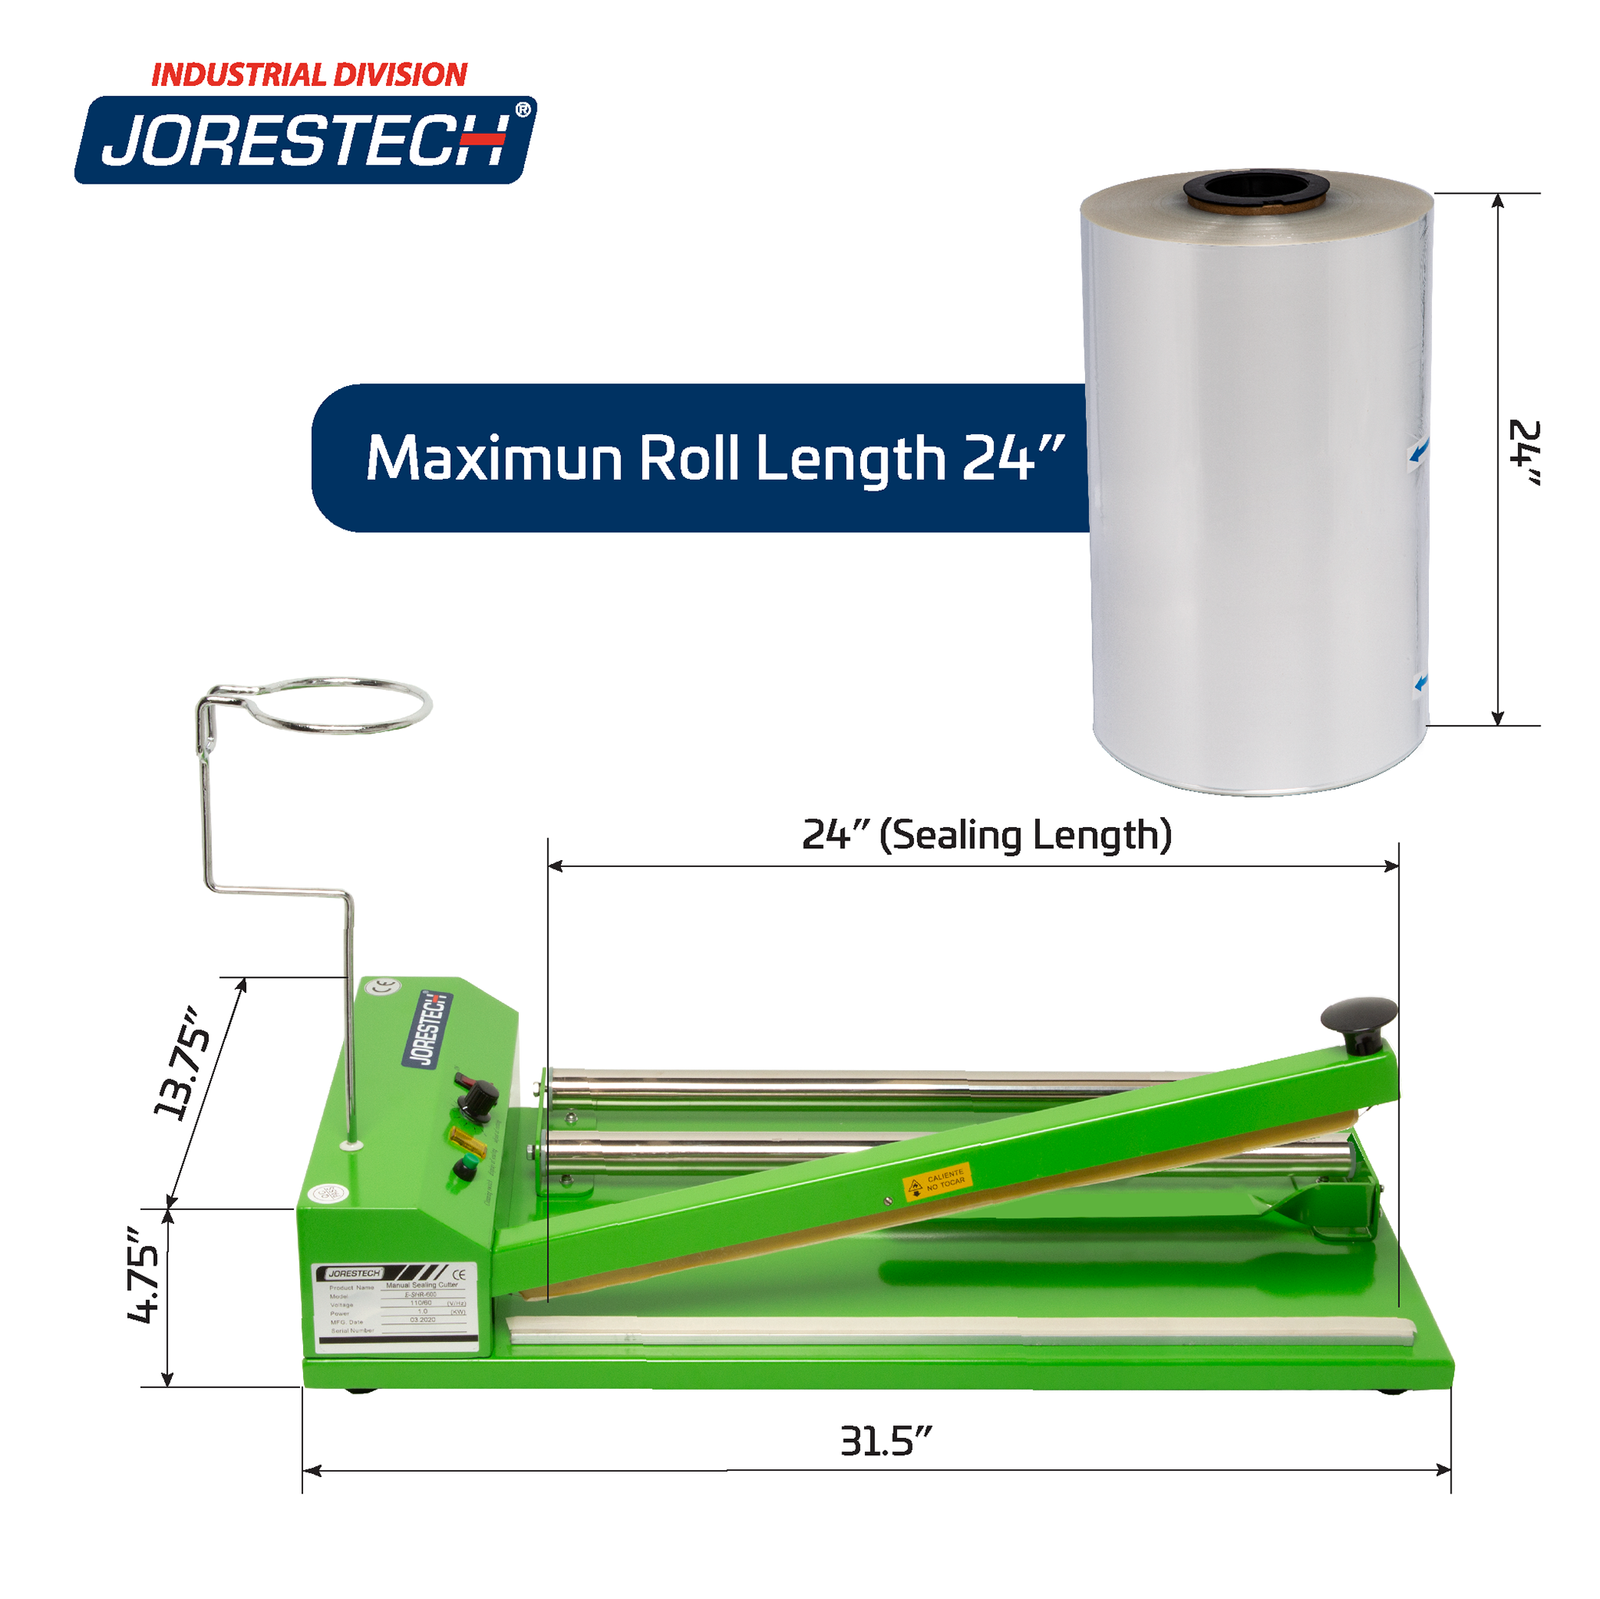 Shows a JORES TECHNOLOGIES® shrink film roll and a green, JORES TECHNOLOGIES® shrink packaging unit with their respective measurements. A blue text next to the shrink roll reads 